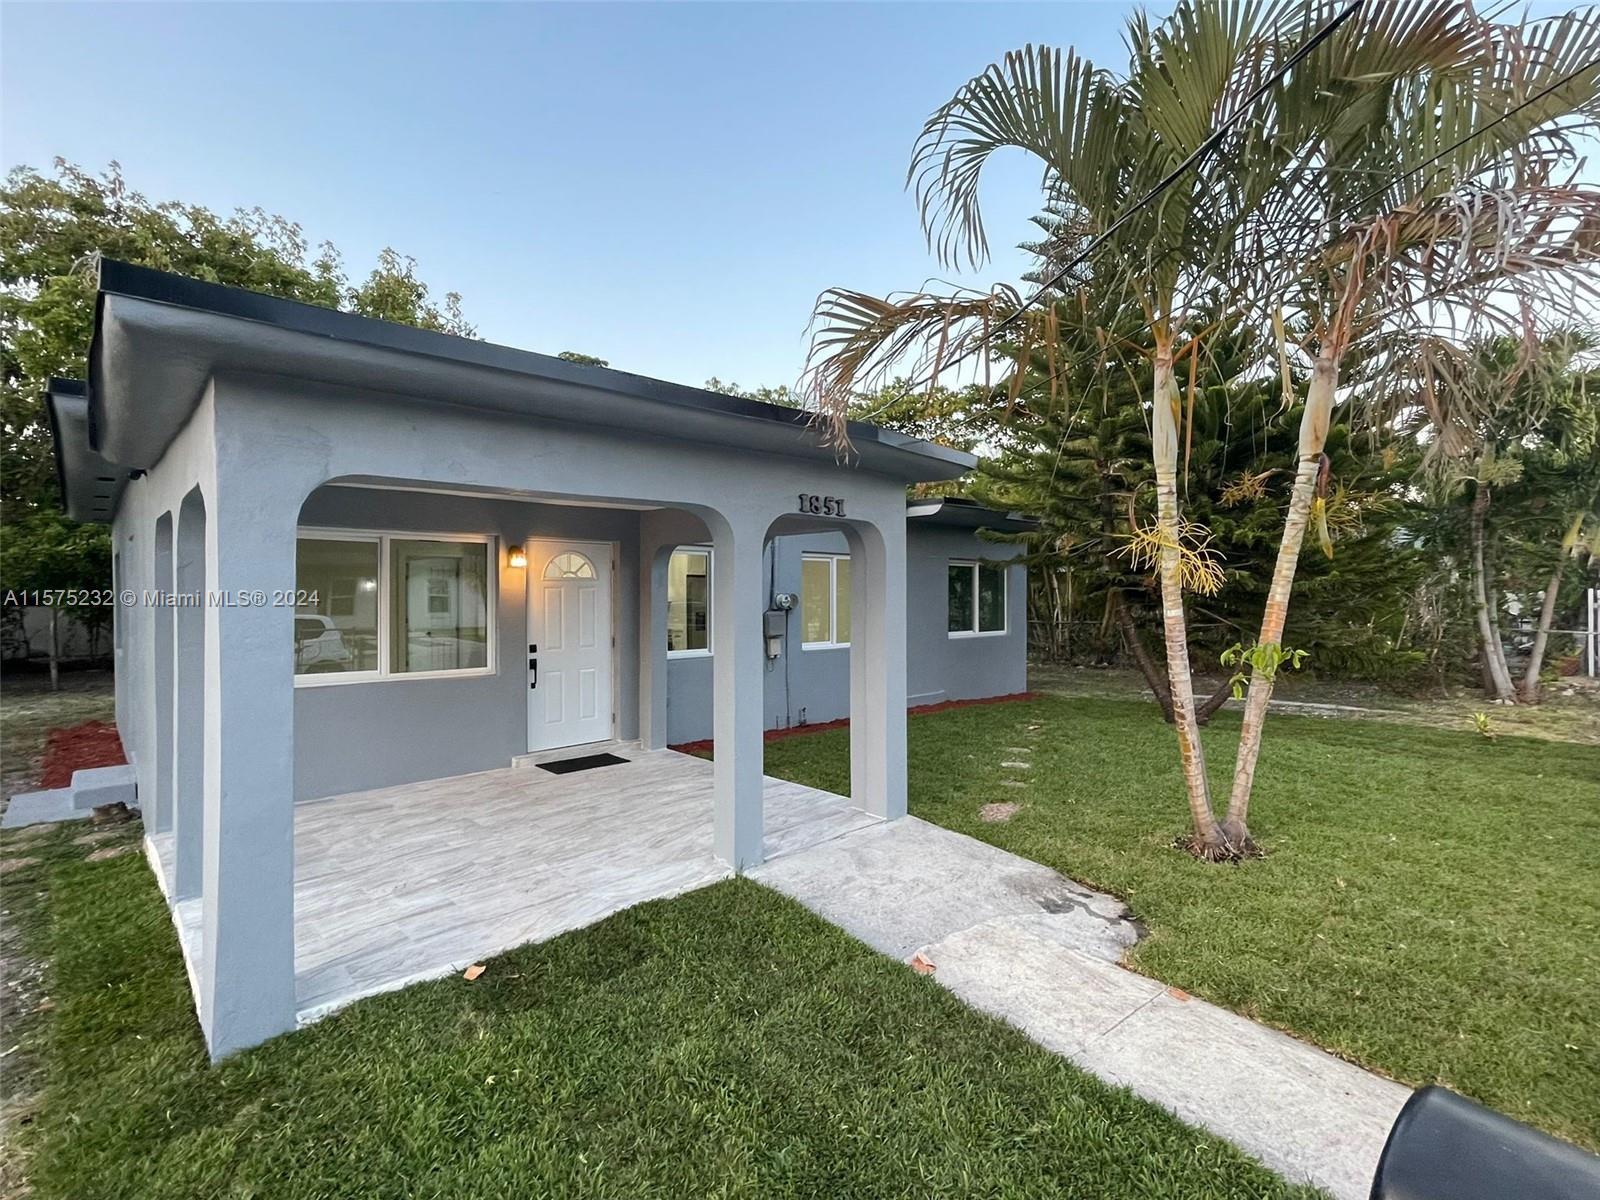 Photo of 1851 NW 64th St in Miami, FL